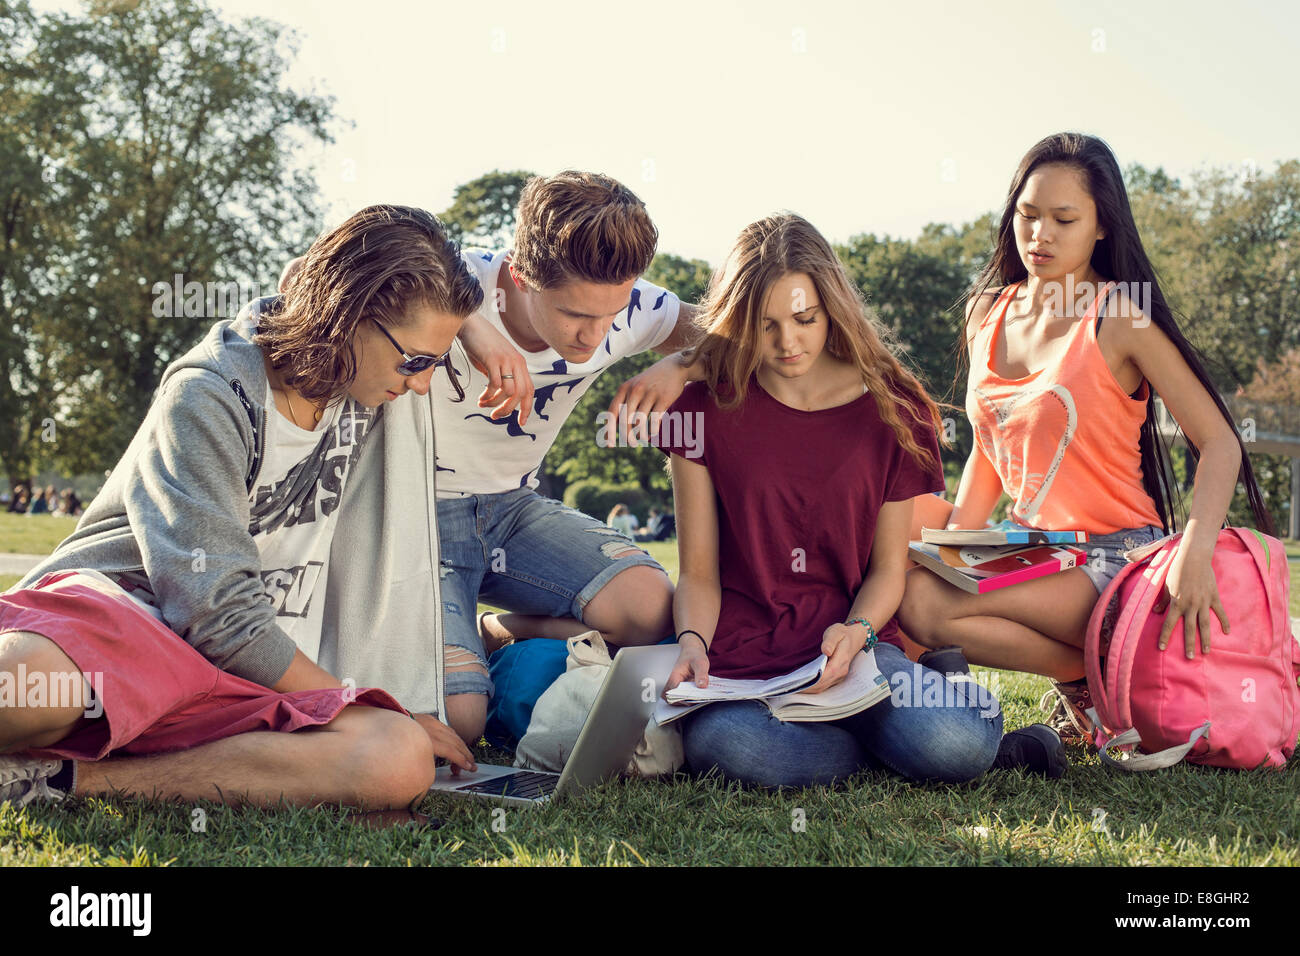 Group of friends studying on high school schoolyard Stock Photo